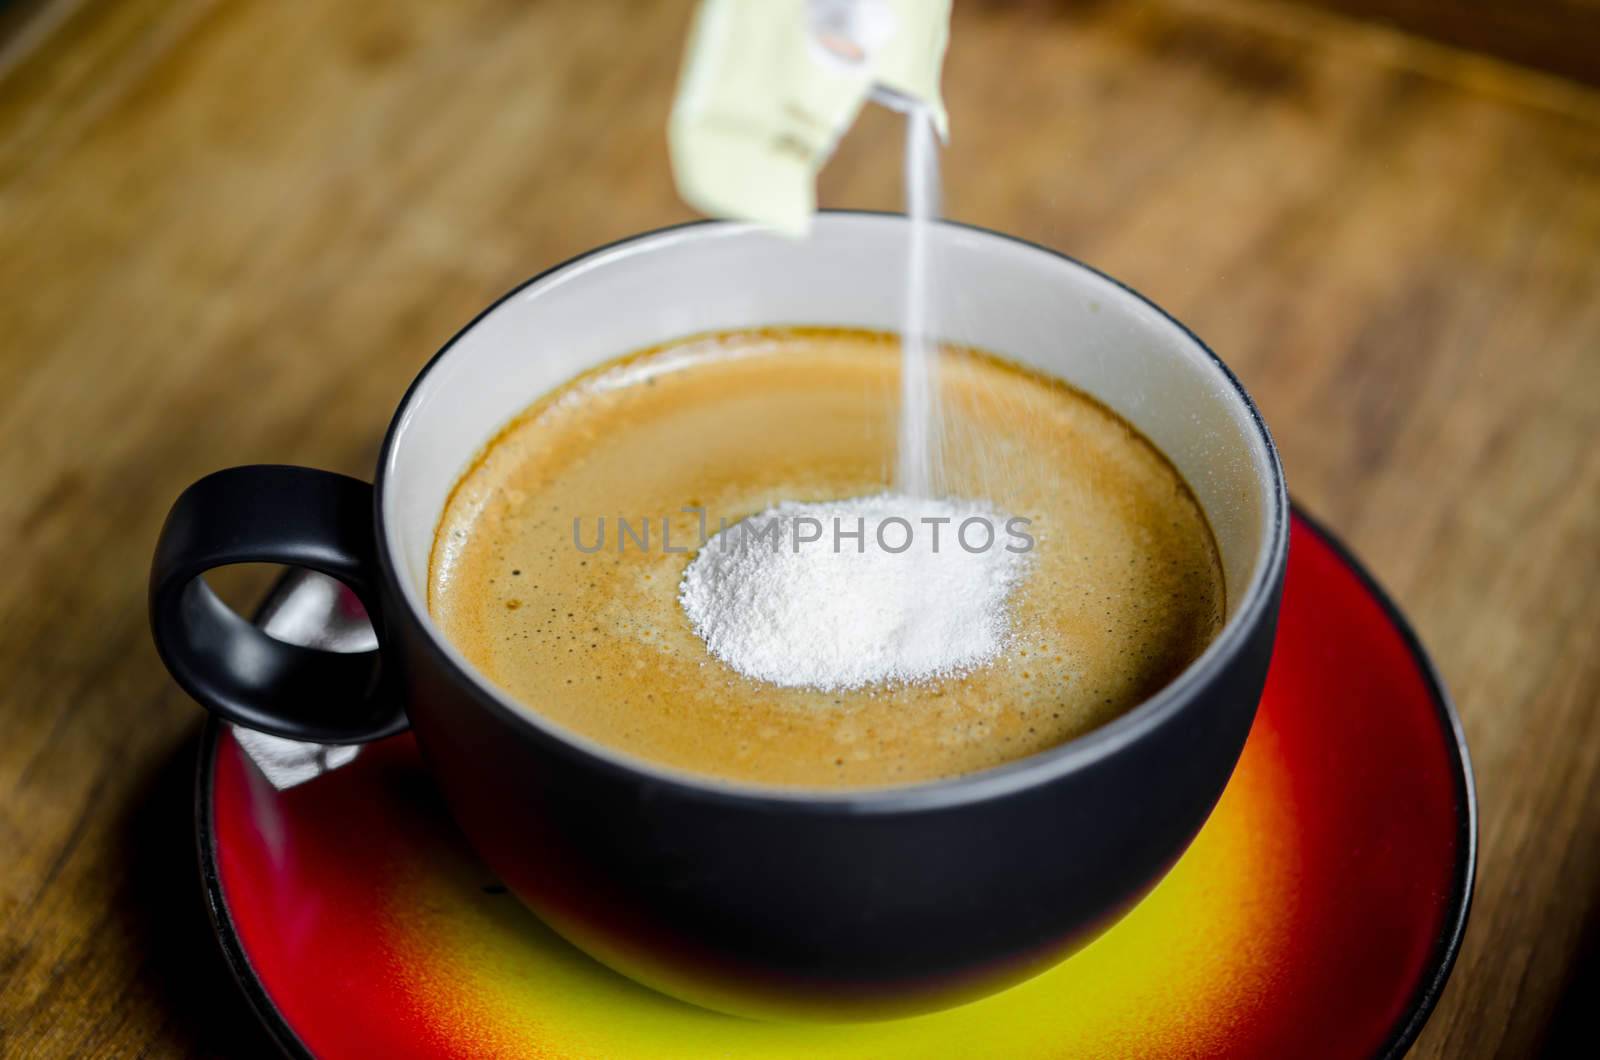 Hand pouring creamer in to a cup of coffee on wooden background.